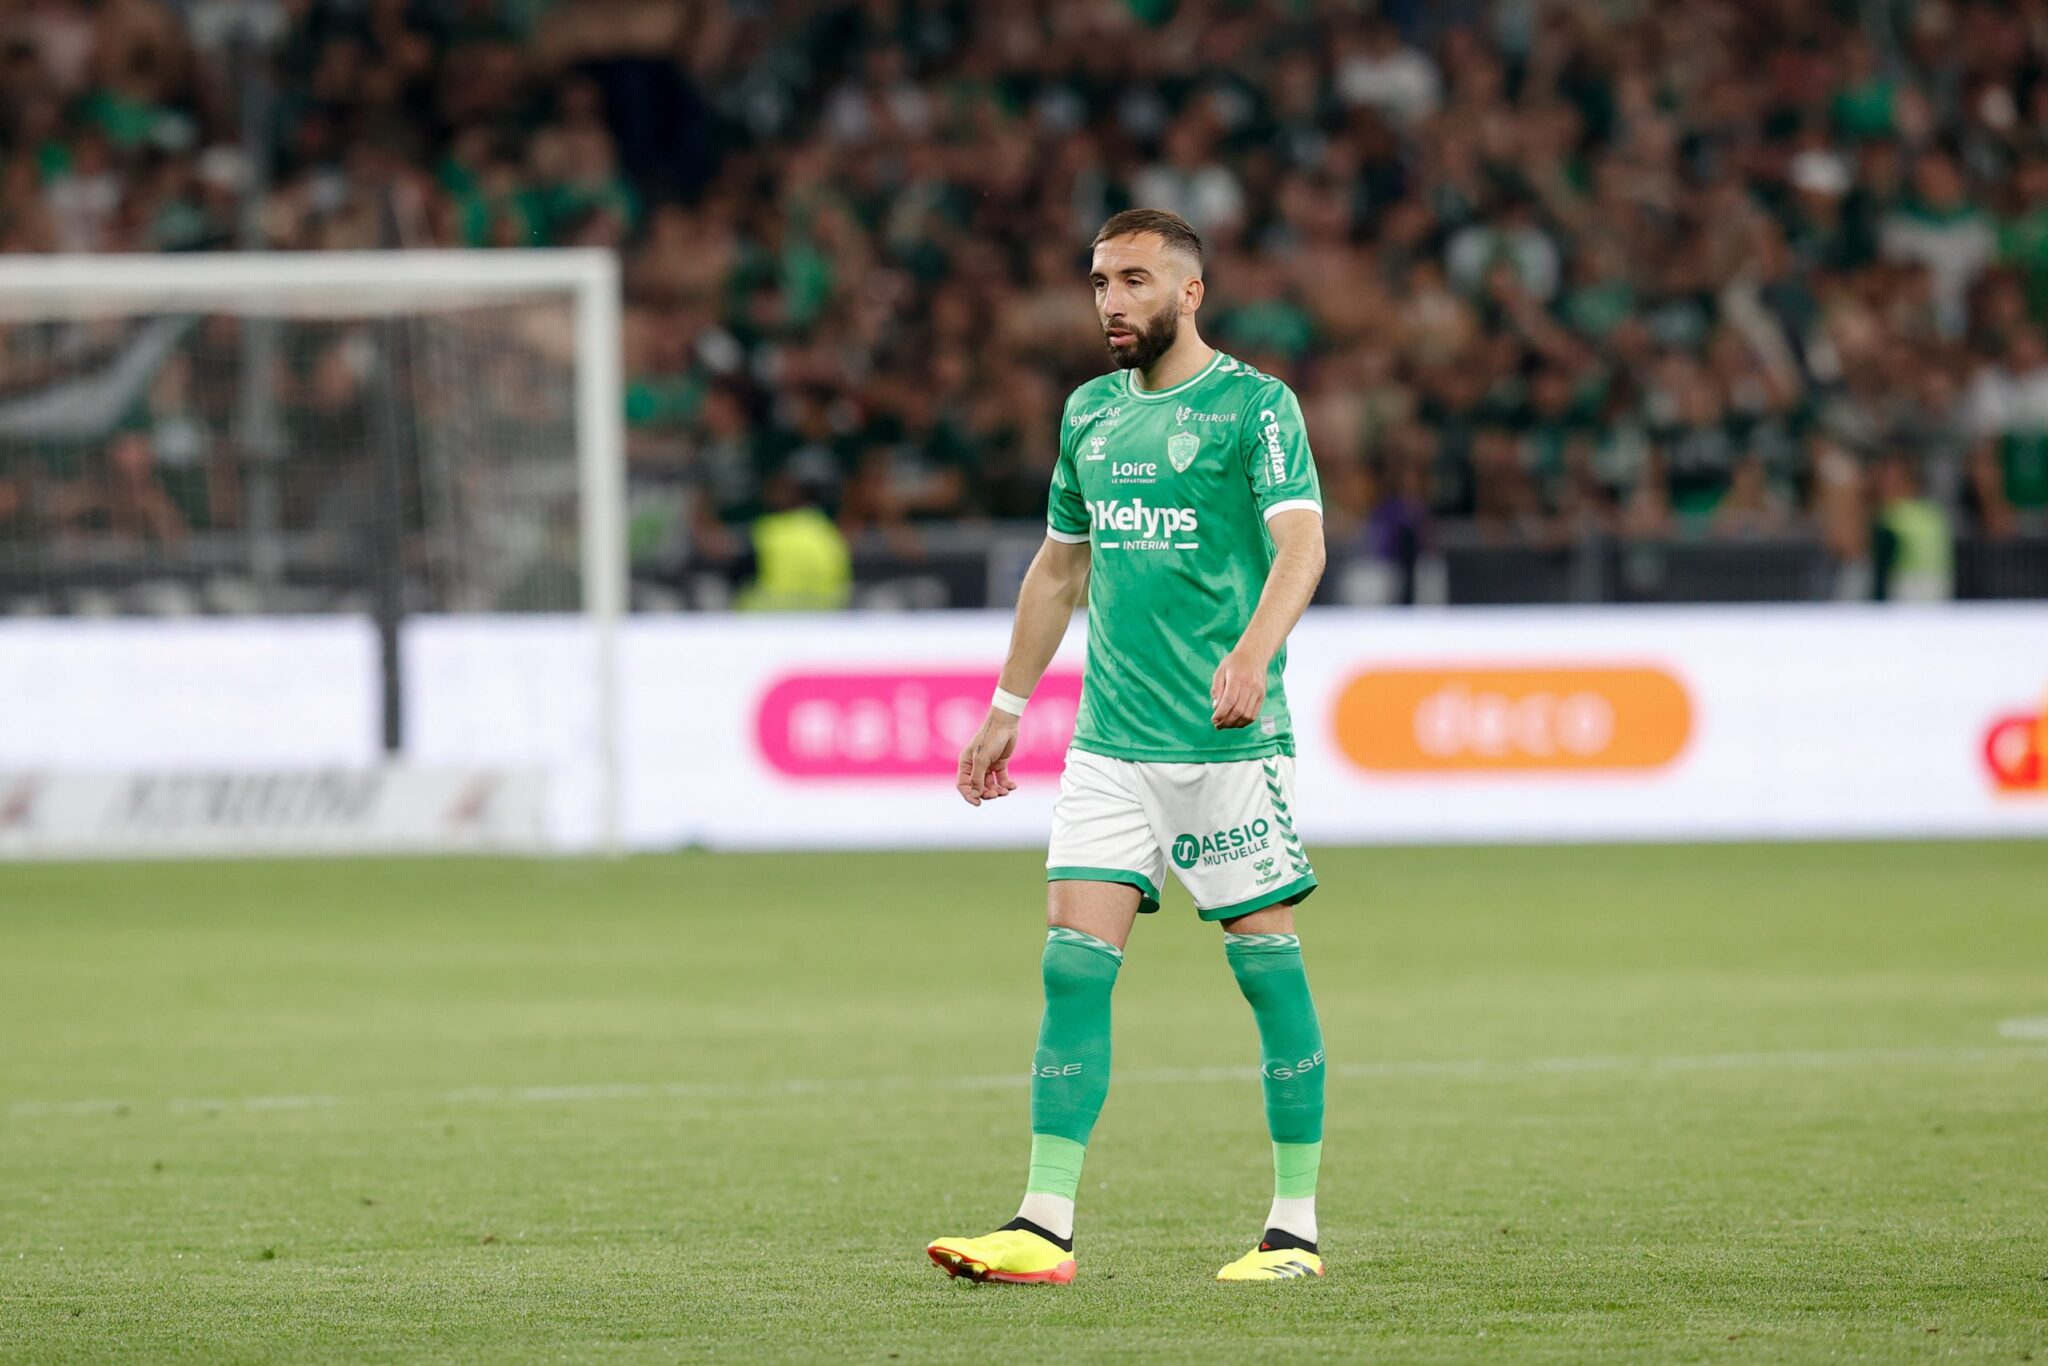 Saint-Etienne – Rodez: streaming, TV channel and compositions